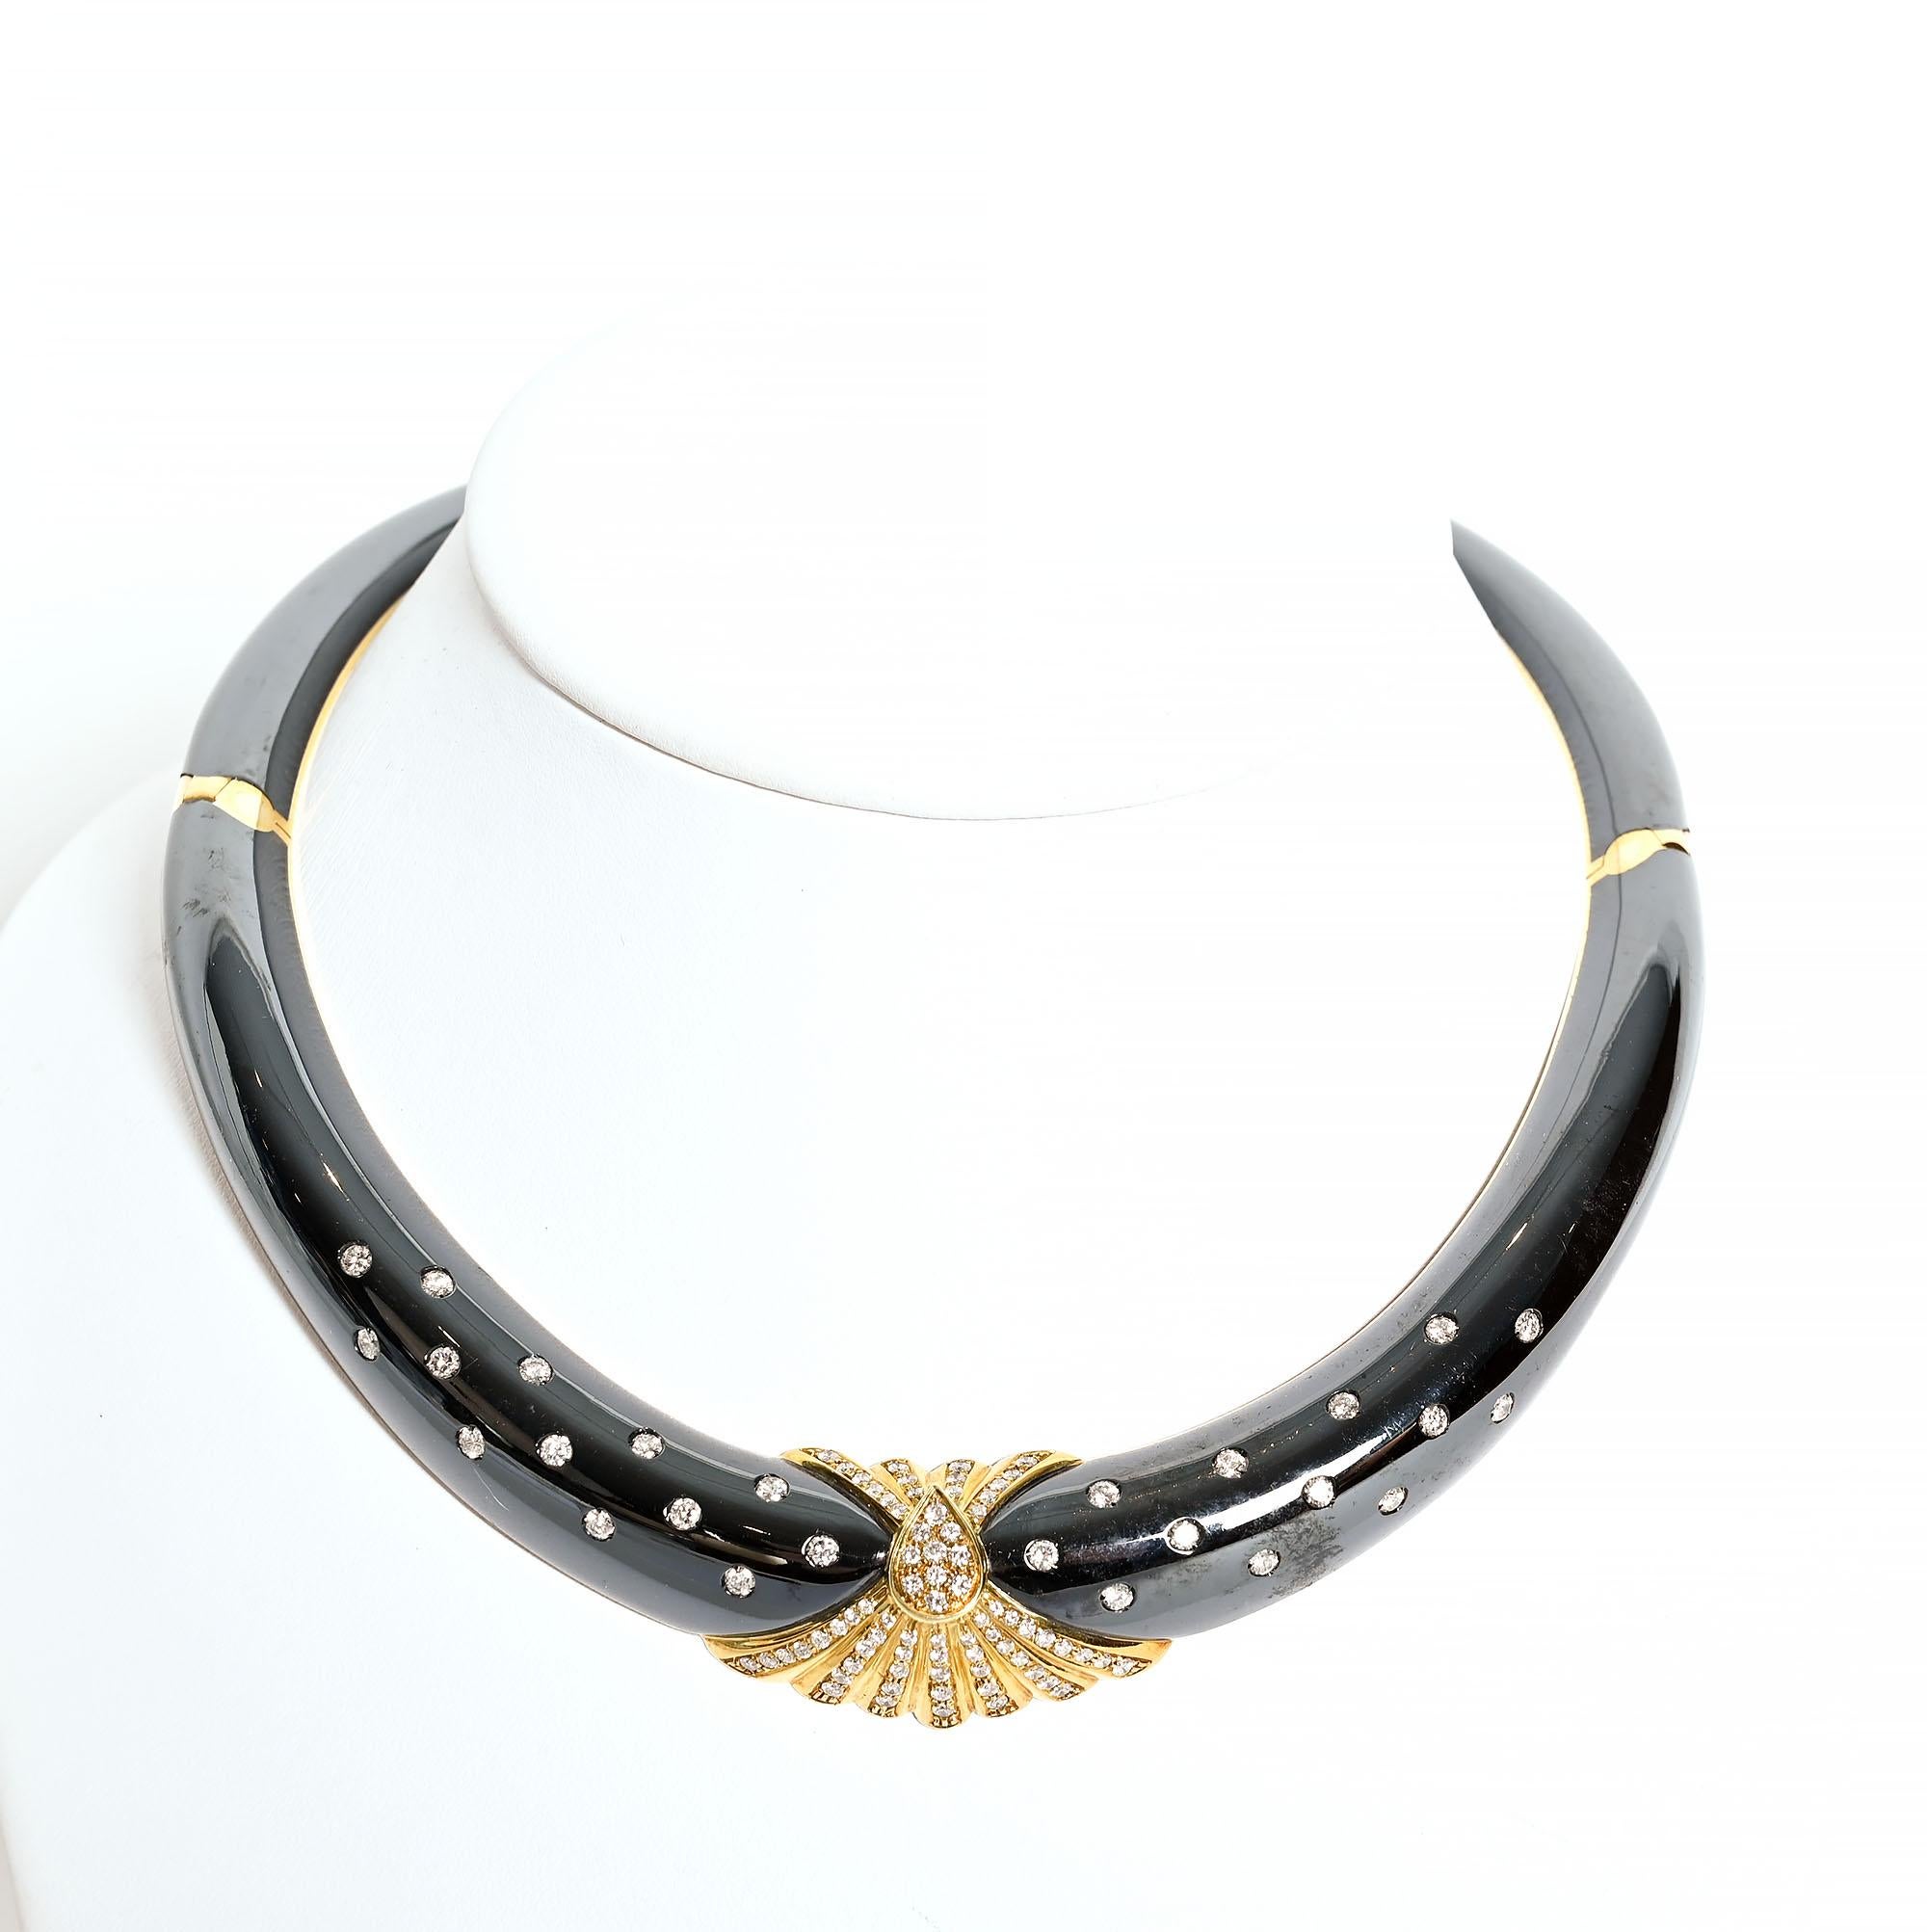 Absolutely smashing choker necklace by Bulgari with black enamel; gold and diamonds. The body of the necklace is sprinkled with 26 diamonds weighing approximately 2.5 carats. The center element has approximately 3.6 carats of diamonds encircling the